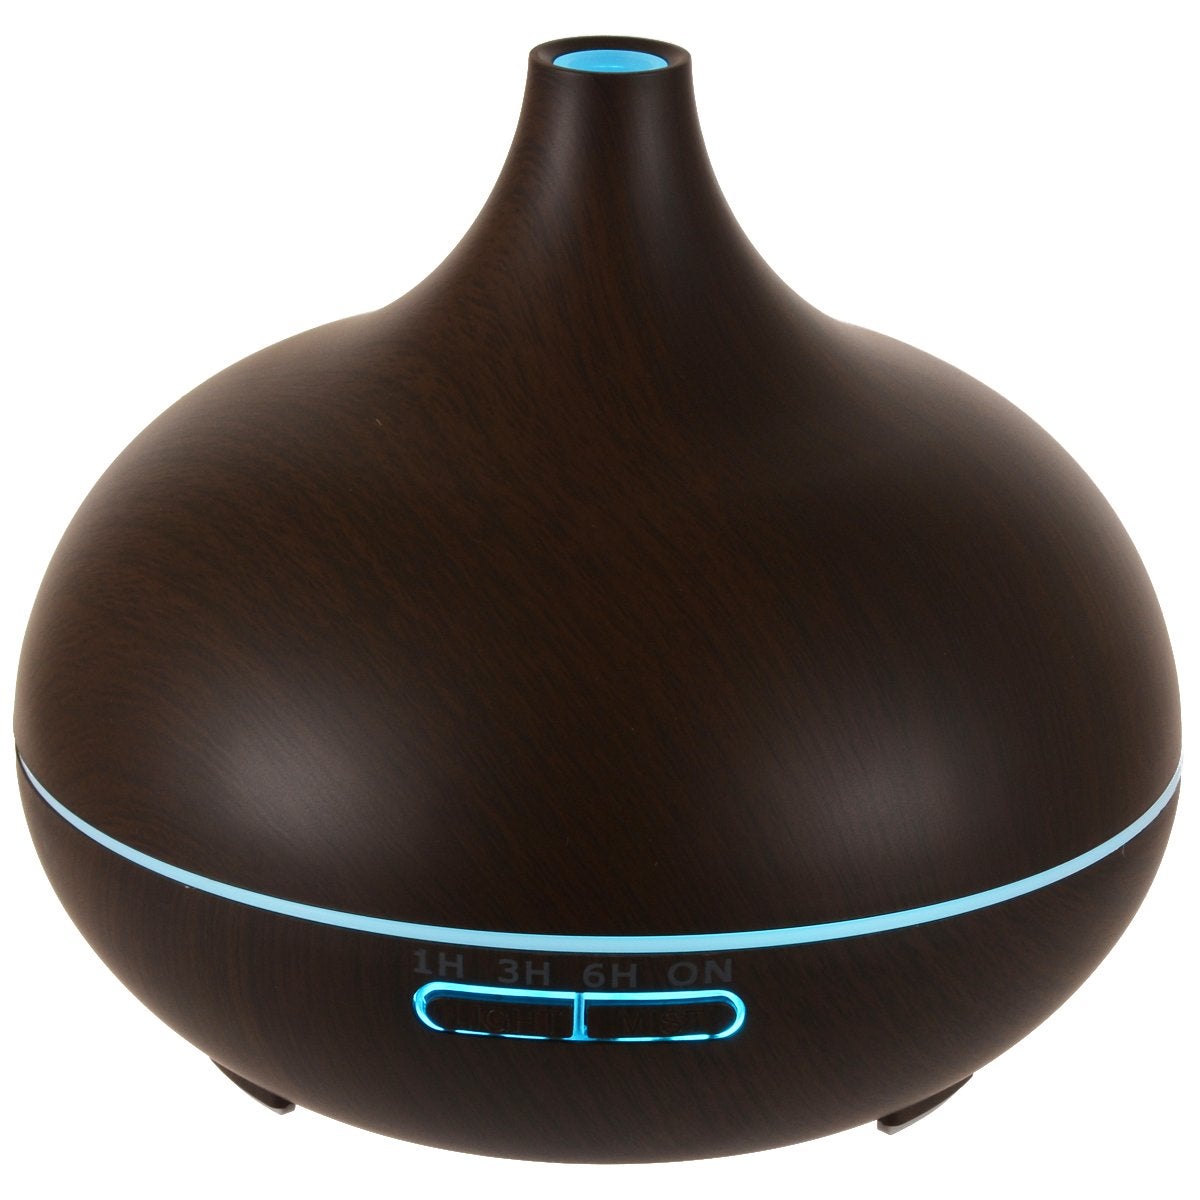 Essential Oil Aroma Diffuser Air Humidifier Mist Purifier Aromatherapy